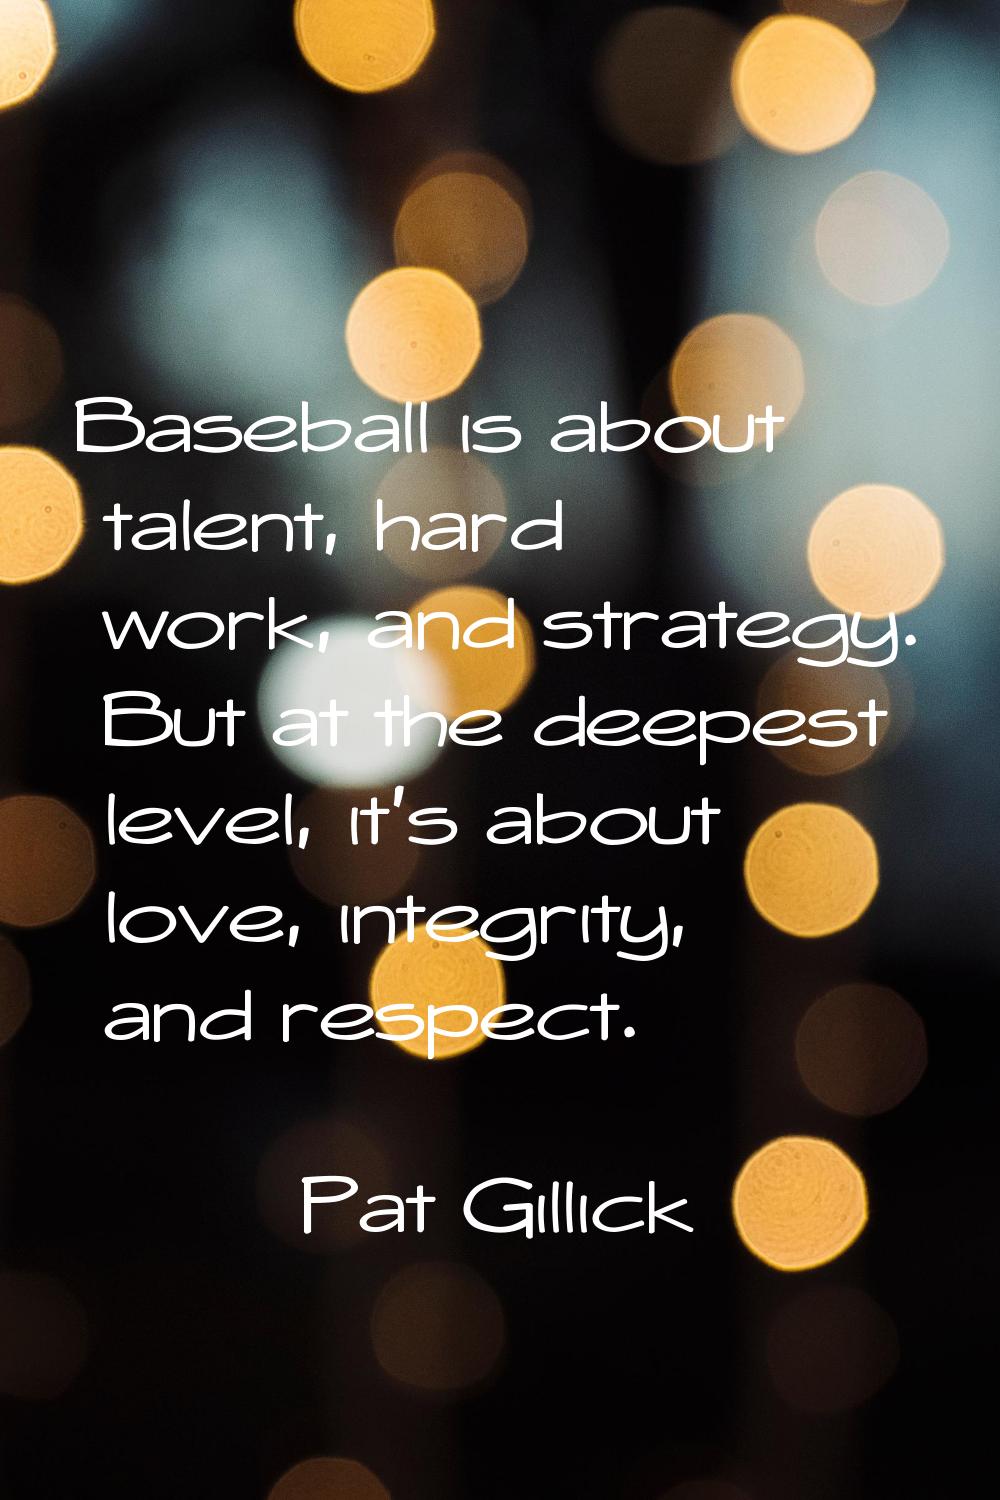 Baseball is about talent, hard work, and strategy. But at the deepest level, it's about love, integ